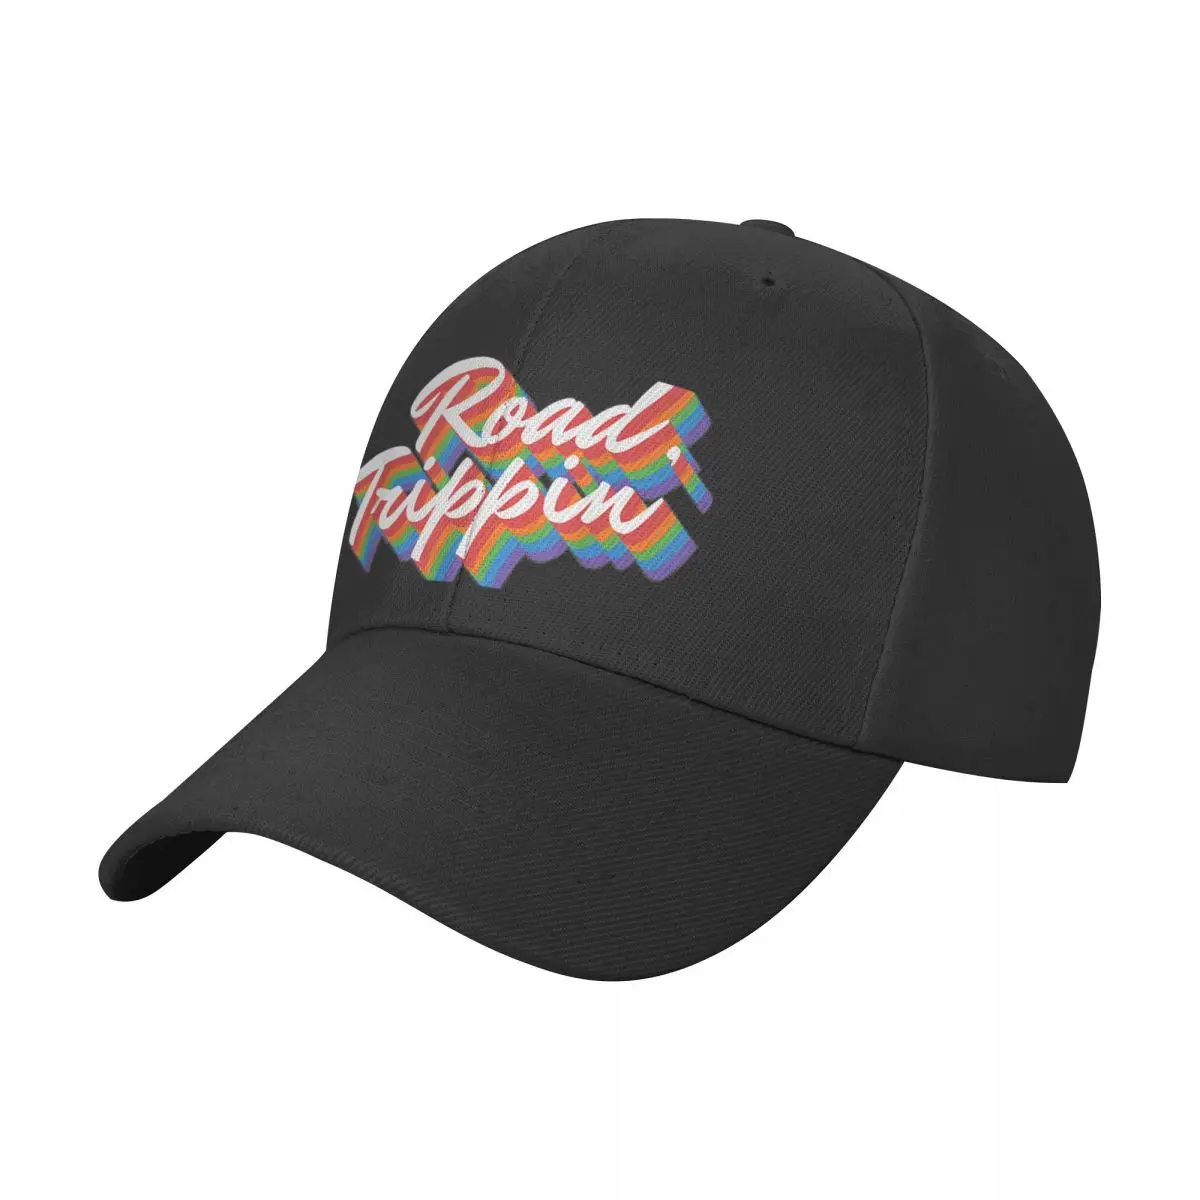 

Retro Road Trippin" 70s Style Road Trip Vacation Travel Baseball Cap cute Icon Golf Hat Man Vintage For Girls Men's